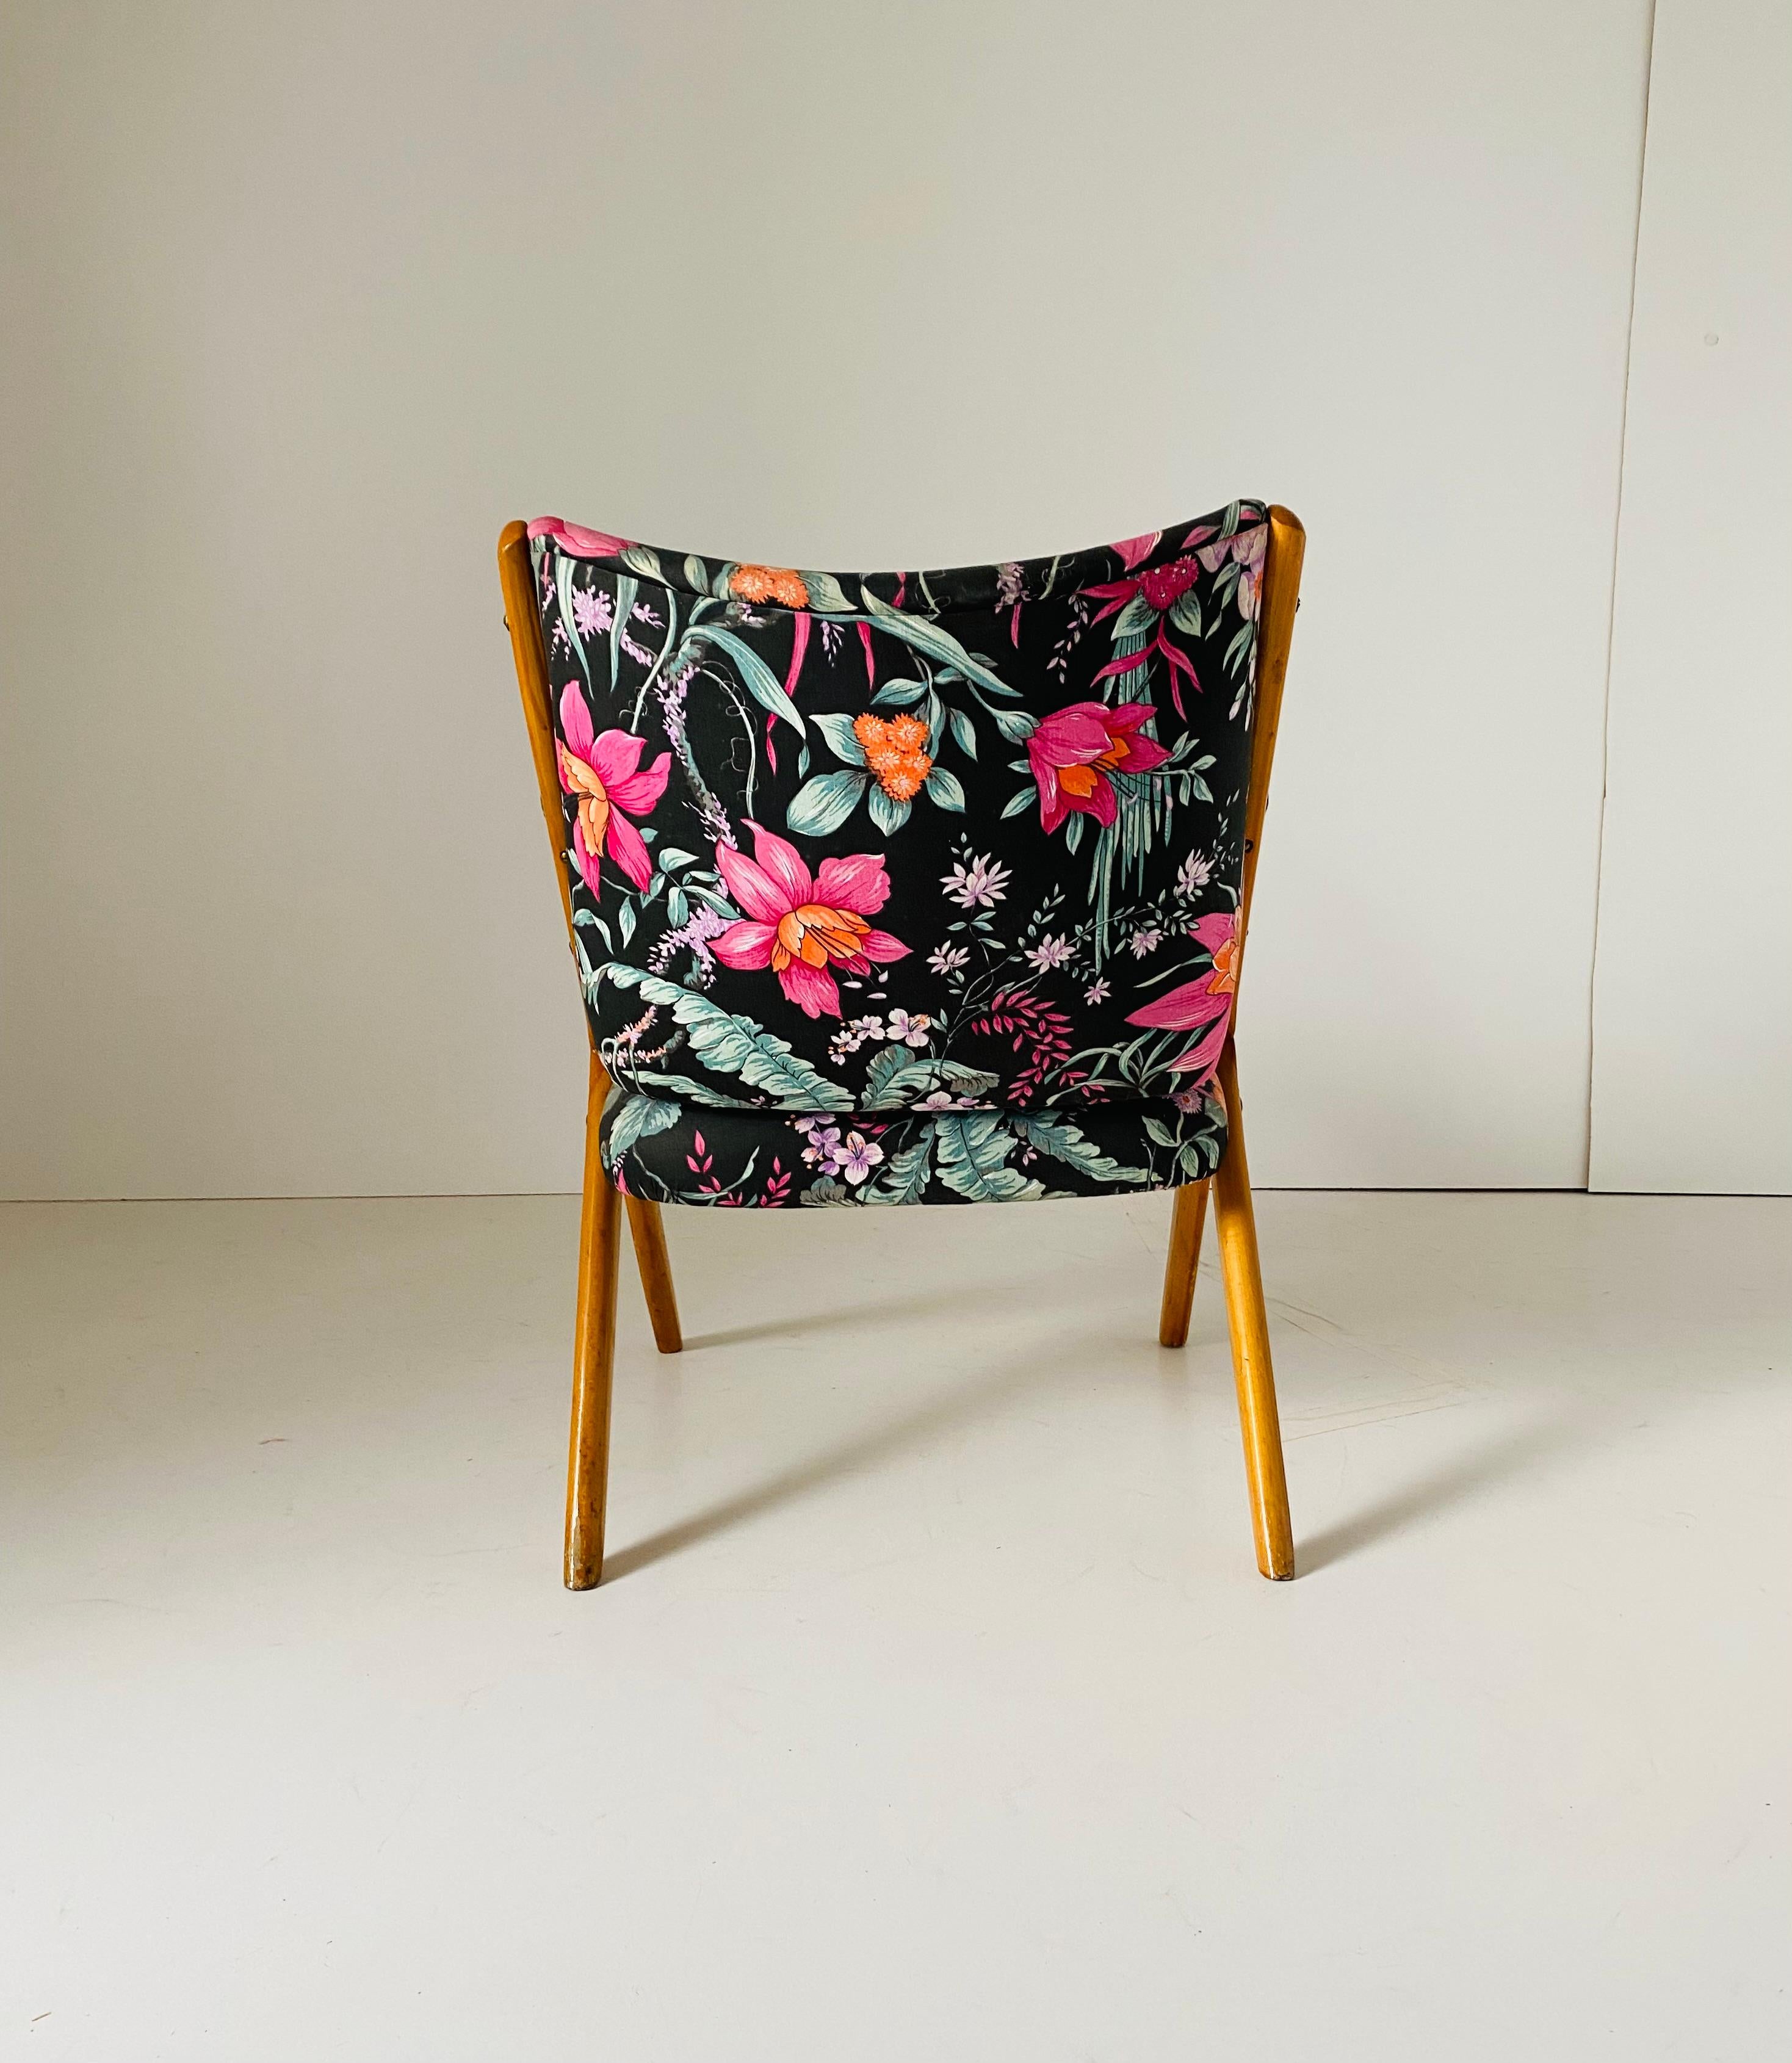 Midcentury Modern Dal Vera Armchair with Flower Pattern, Italy 1960's In Good Condition For Sale In Ceglie Messapica, IT